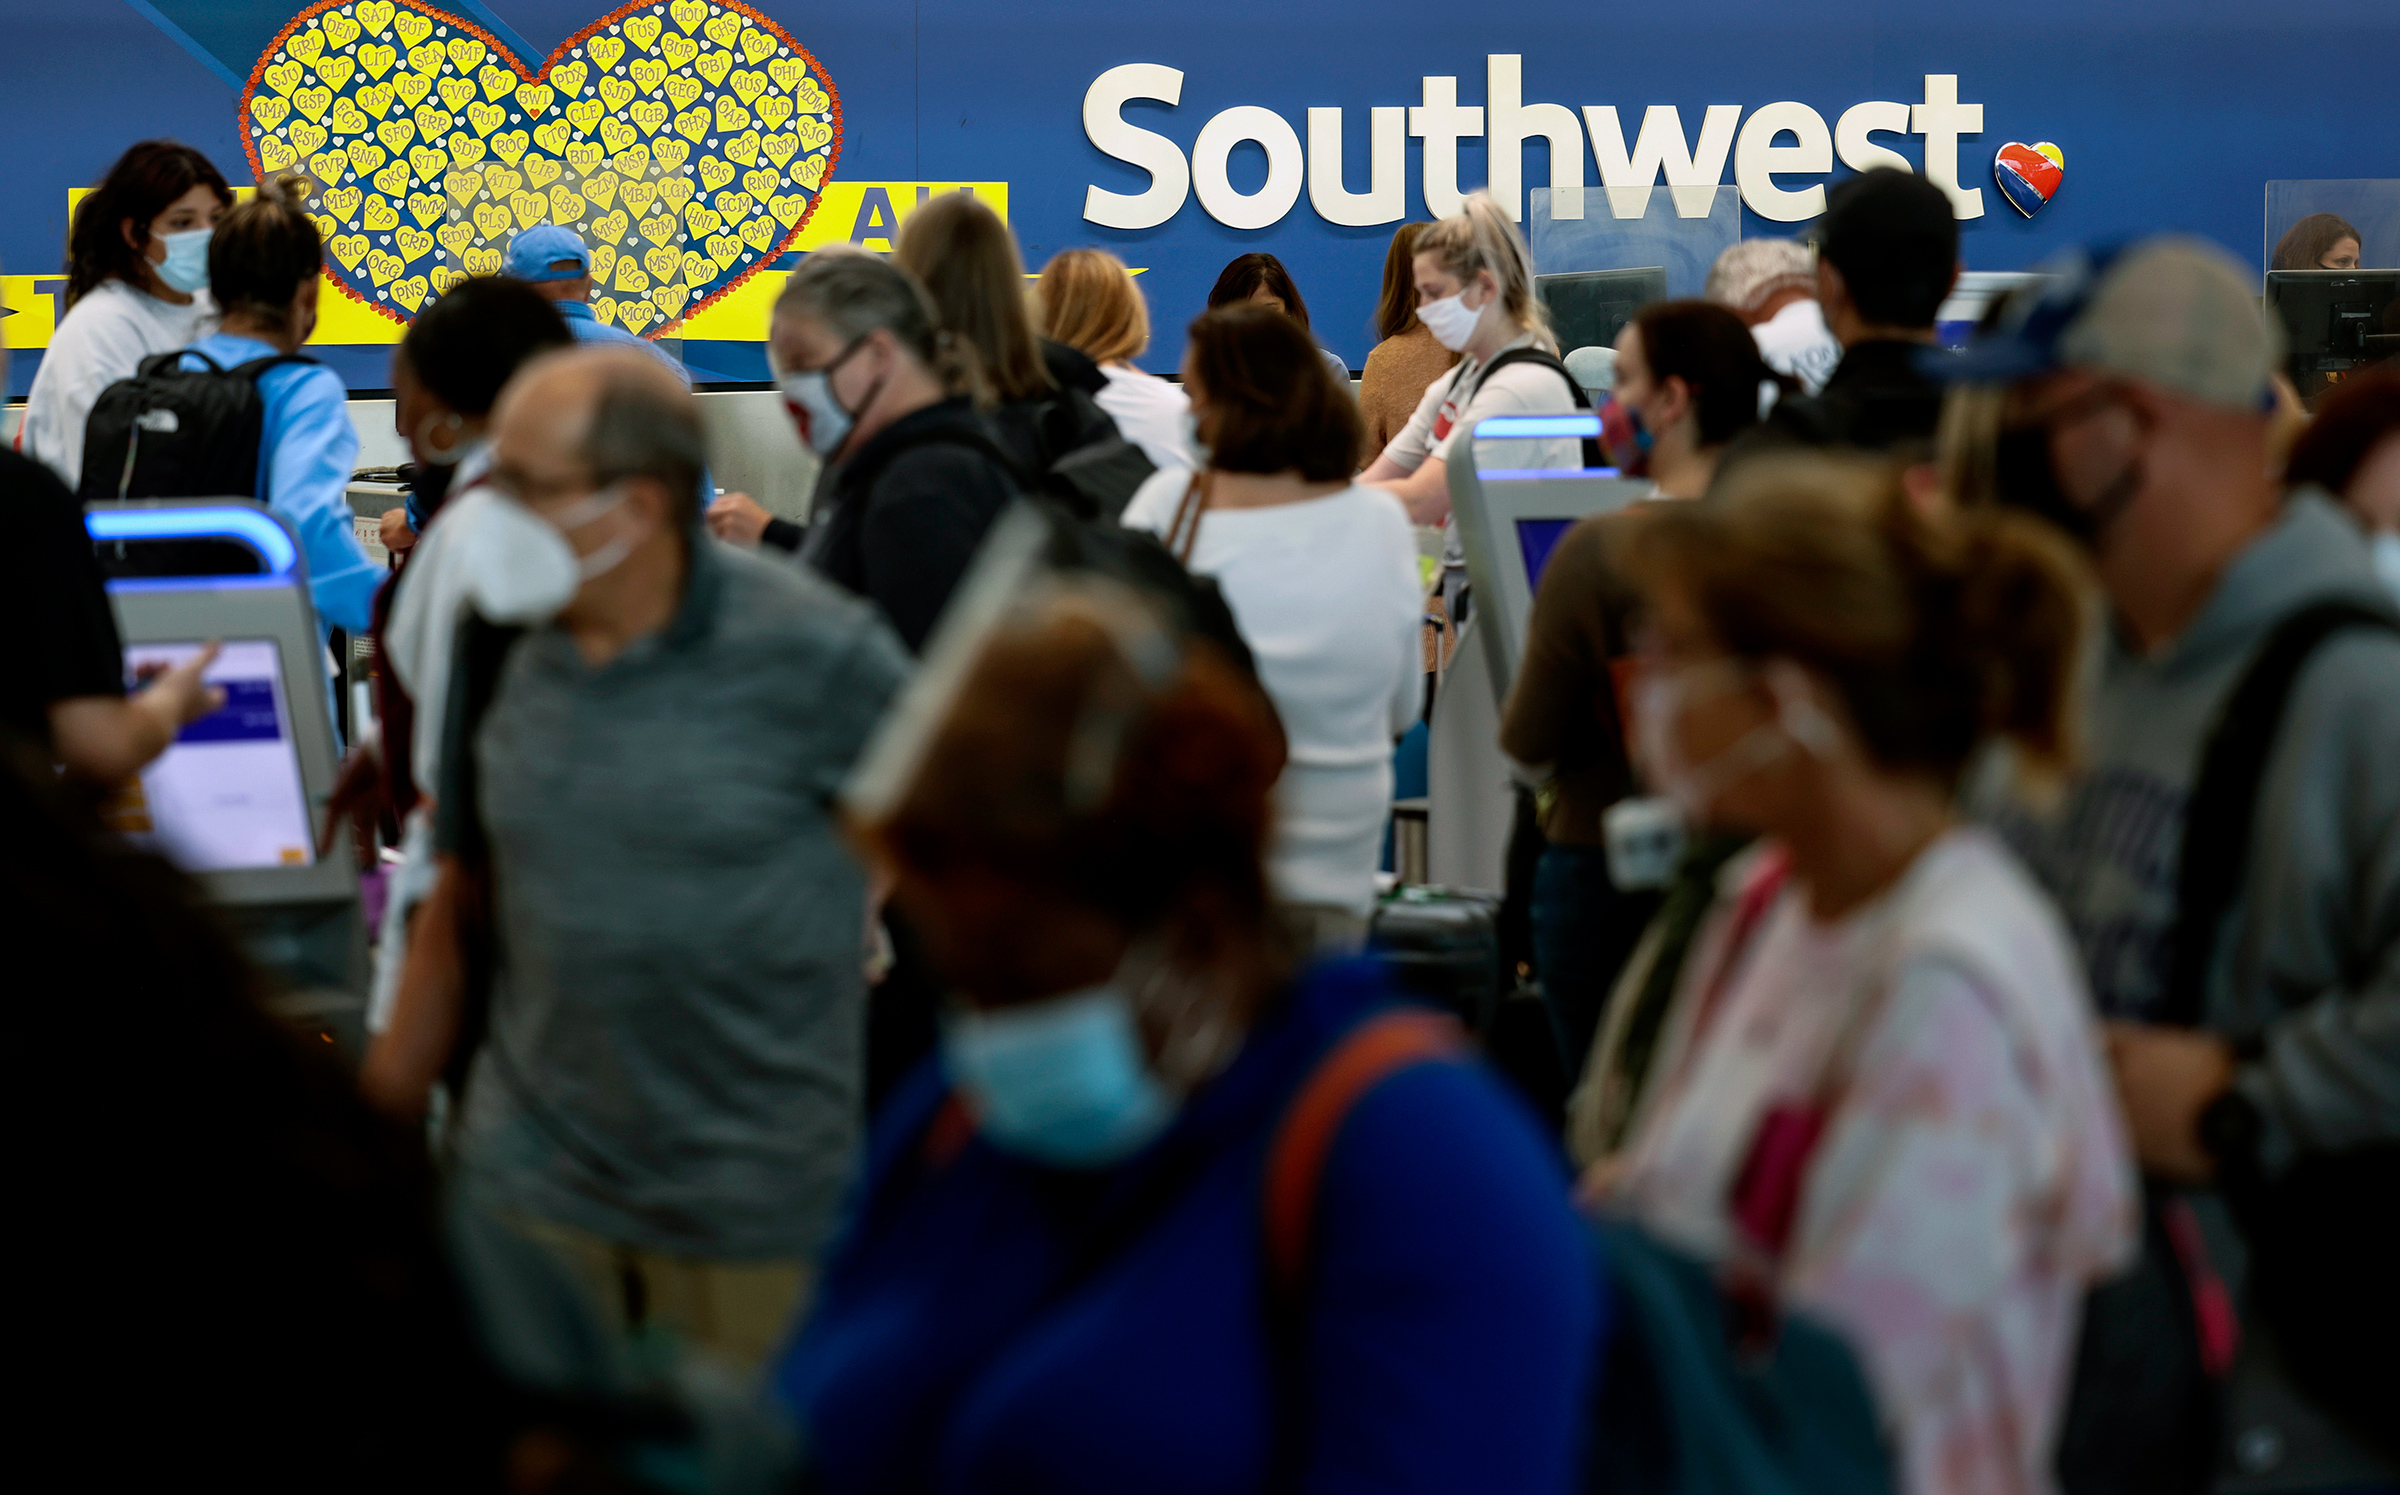 Southwest Airlines, which is headquartered in Dallas, is among the businesses that have said they will continue to require vaccination, telling TIME they feel the federal action “supersedes” state laws. (Kevin Dietsch—Getty Images)